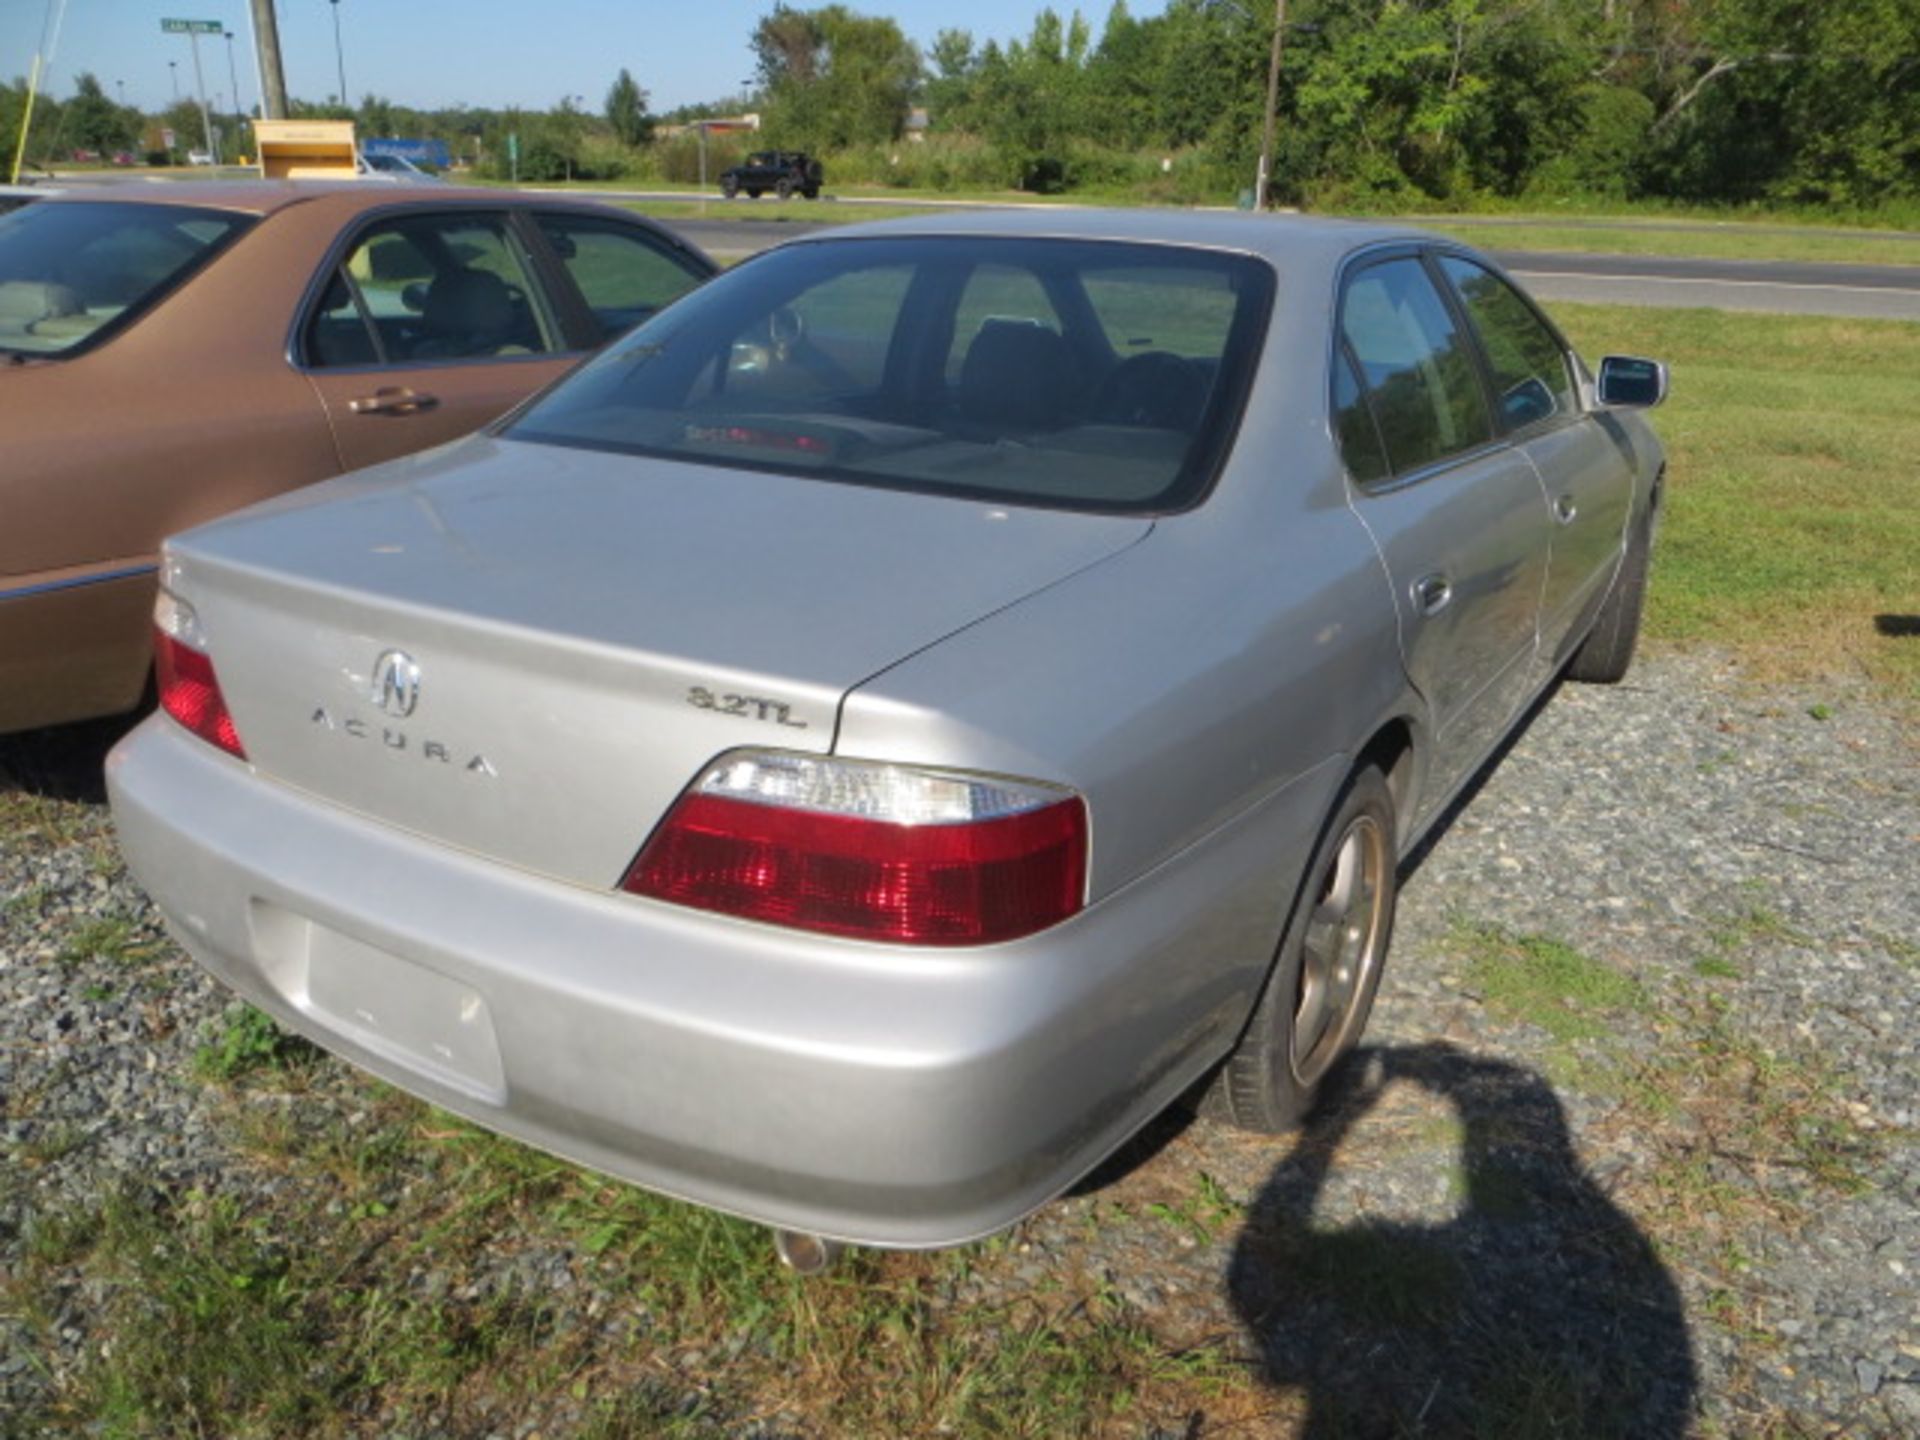 2002 Acura TL-NEEDS GAS GAUGE 98000 MILES,VIN 19UUA56683A017023, SOLD WITH GOOD TRANSFERABLE TITLE, - Image 3 of 3